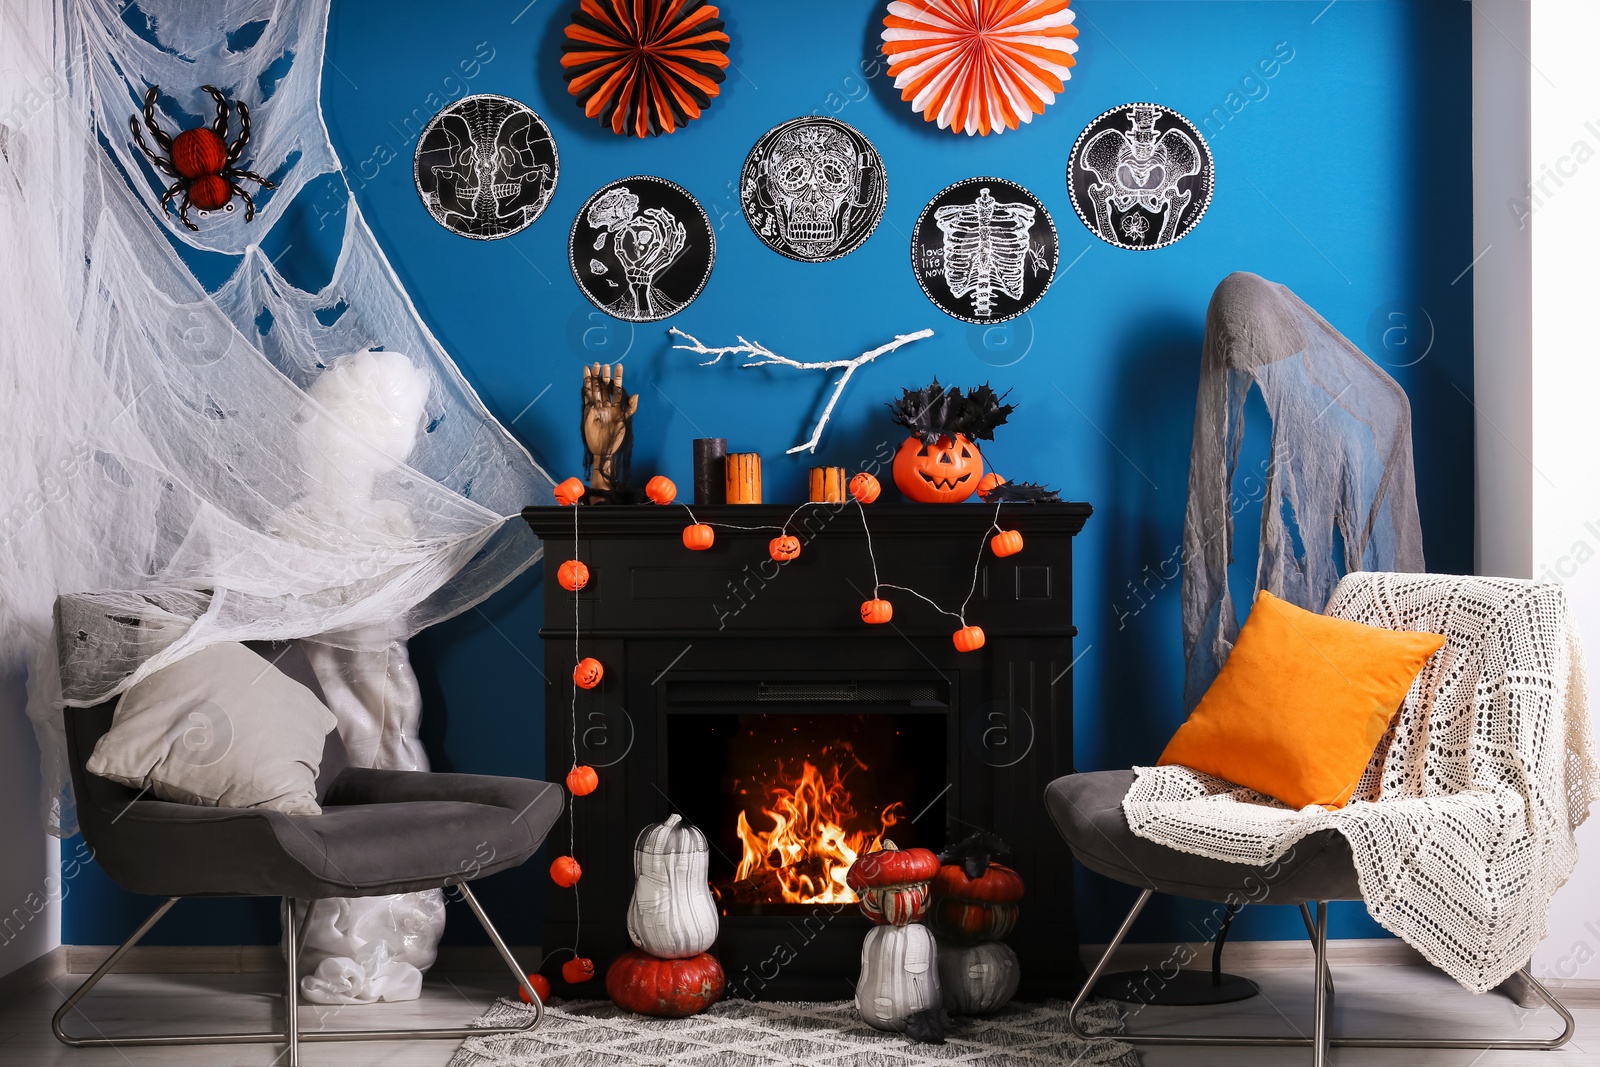 Photo of Jack-o'-lanterns and different Halloween decorations on black fireplace near blue wall